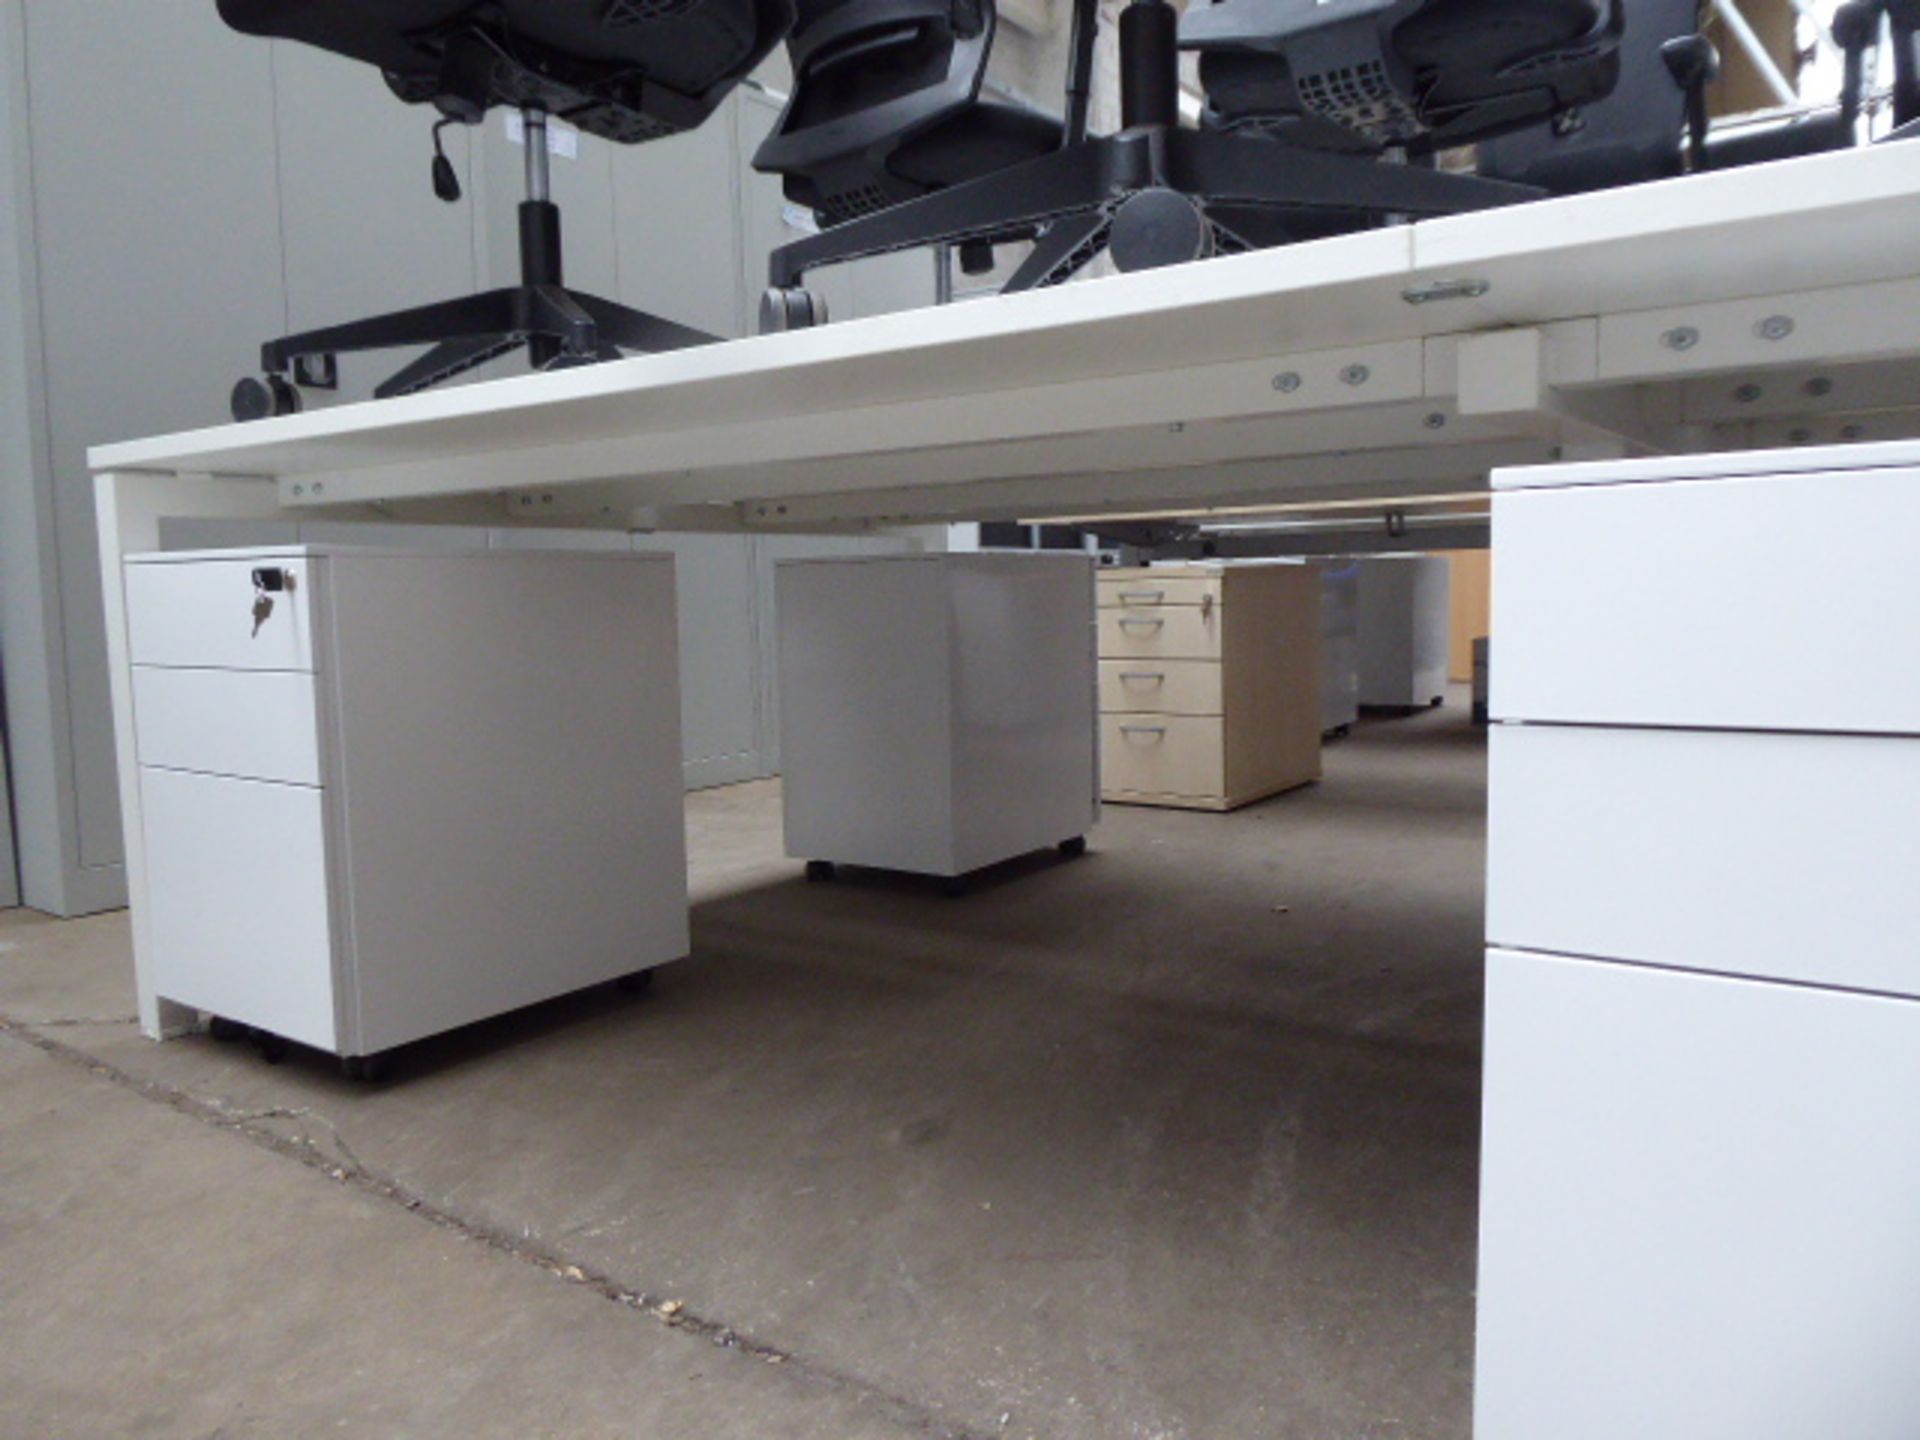 Bank of 6 Senator white 160cm workstations each with a mobile 3-drawer pedestals - Image 3 of 3